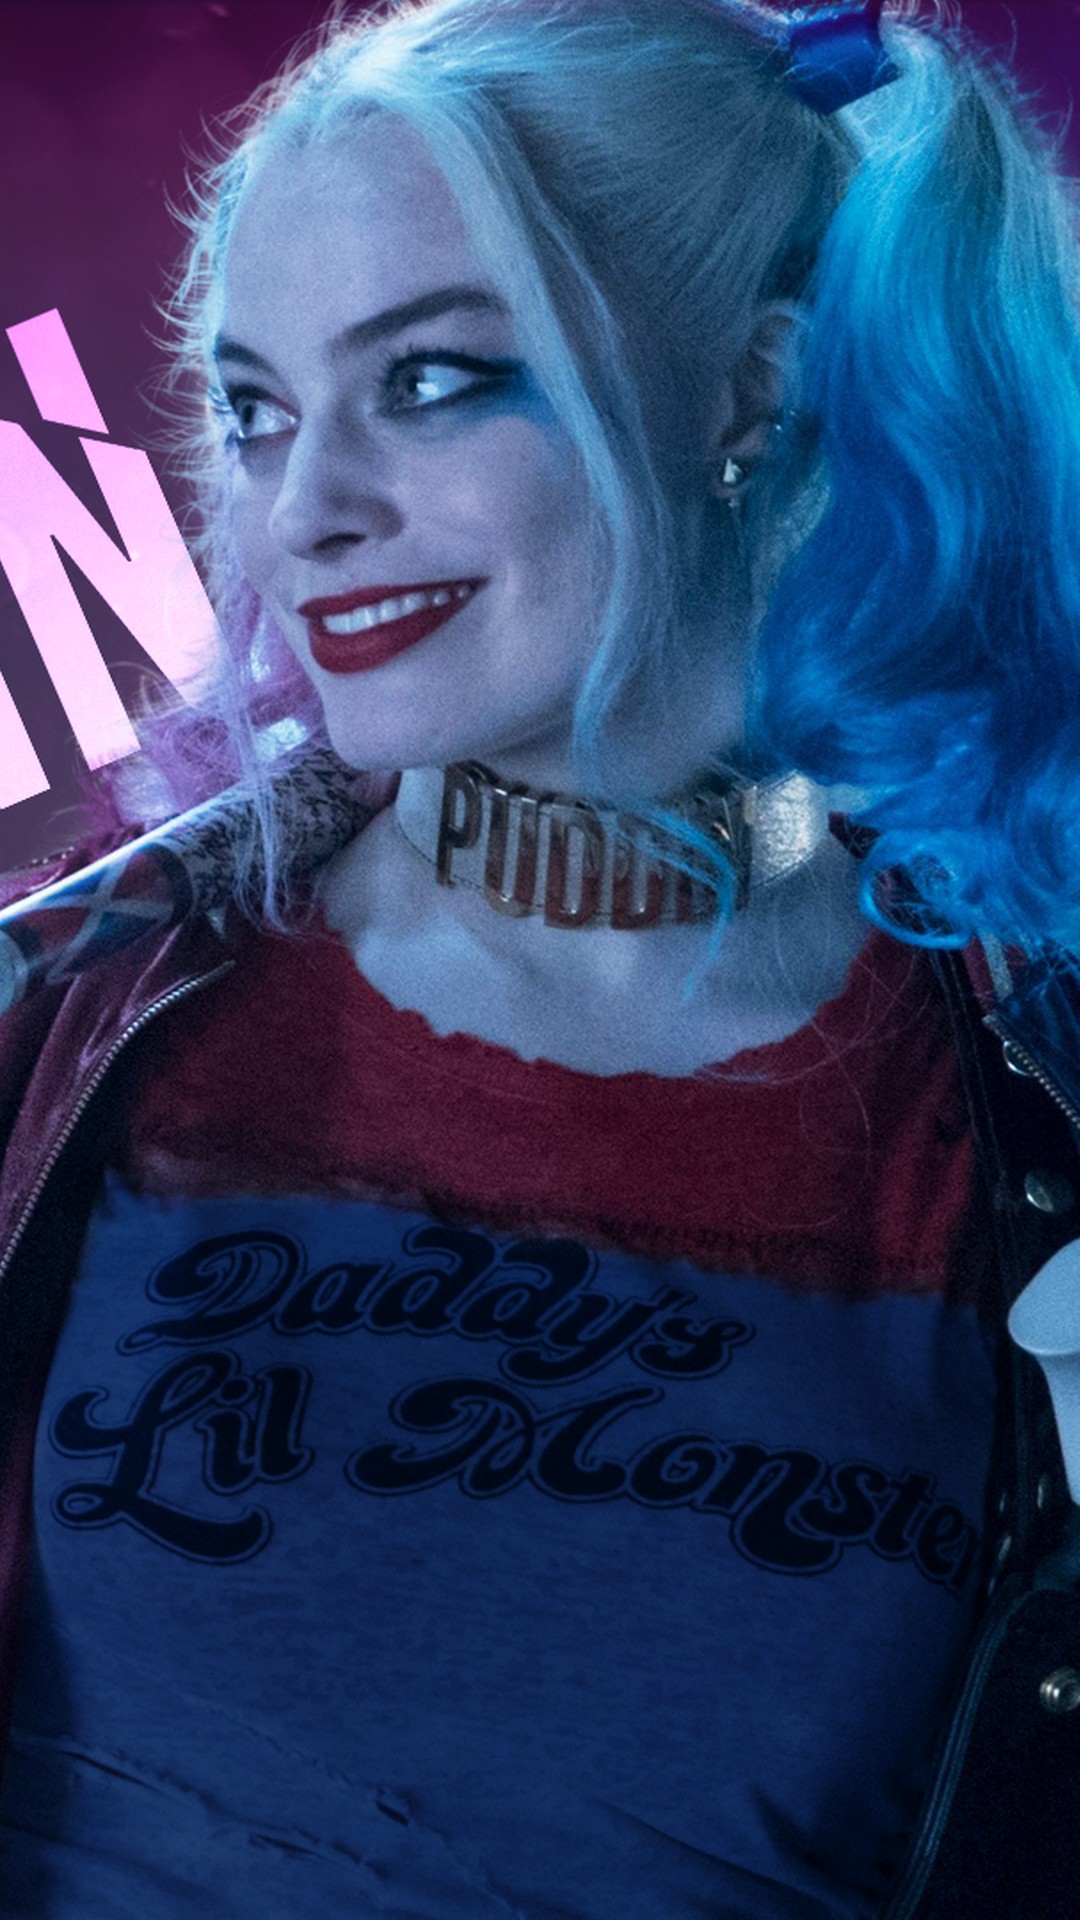 Harley Quinn Wallpaper For Iphone With Image Resolution - Harley Quinn - HD Wallpaper 